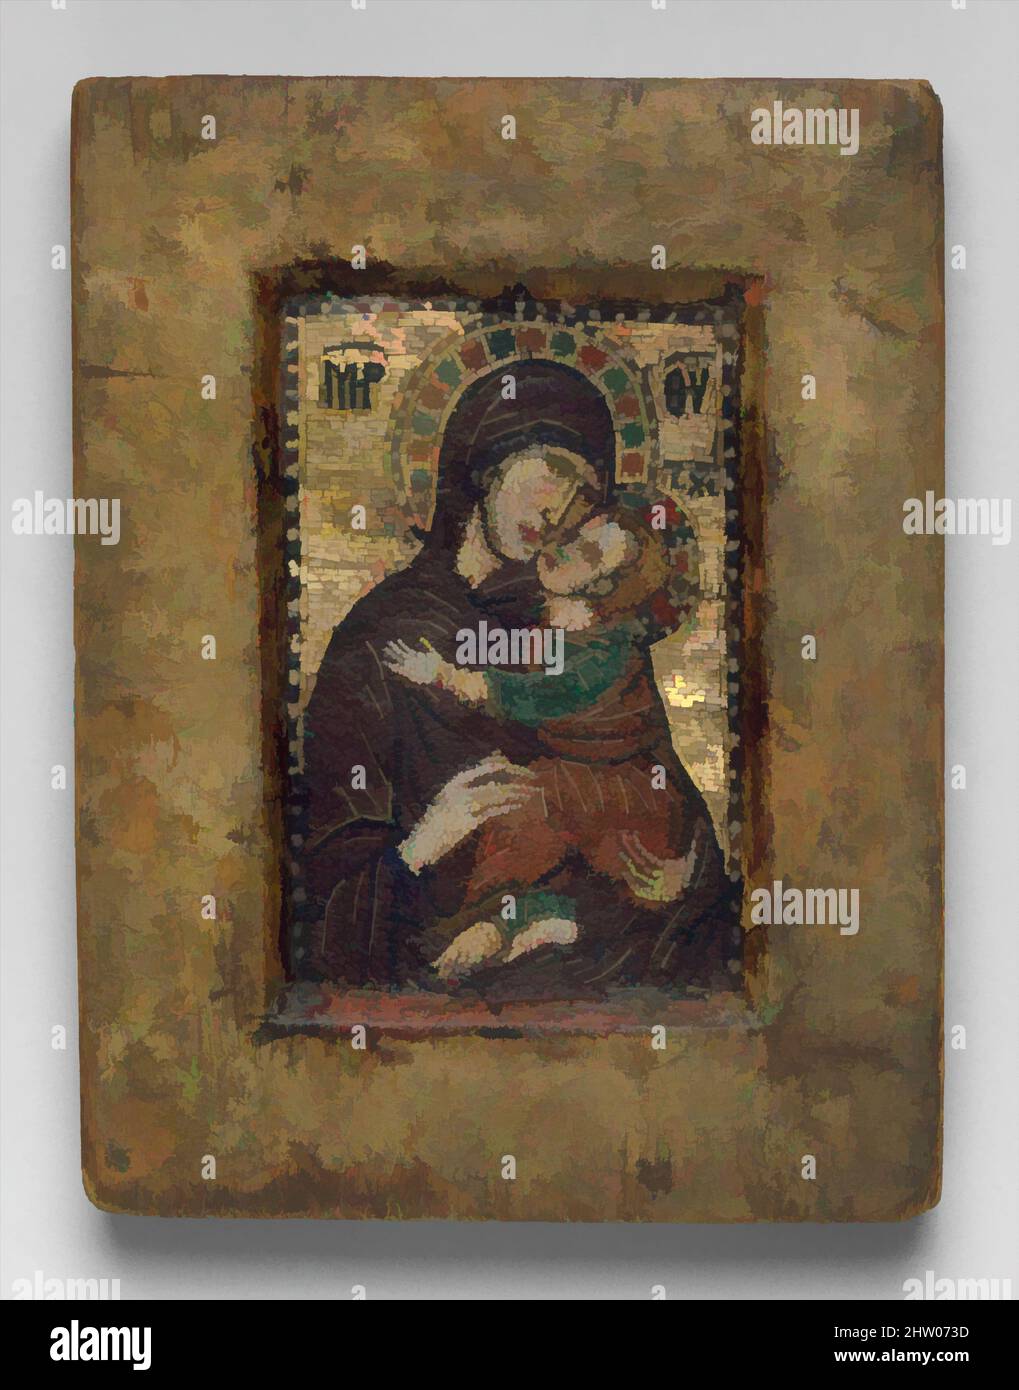 Art inspired by Portable Icon with the Virgin Eleousa, early 1300s, Made in probably Constantinople, Byzantine, Miniature mosaic set in wax on wood panel, with gold, multicolored stones, and gilded copper, Overall: 4 7/16 x 3 3/8 x 1/2 in. (11.2 x 8.6 x 1.3 cm), Mosaics, Images of the, Classic works modernized by Artotop with a splash of modernity. Shapes, color and value, eye-catching visual impact on art. Emotions through freedom of artworks in a contemporary way. A timeless message pursuing a wildly creative new direction. Artists turning to the digital medium and creating the Artotop NFT Stock Photo